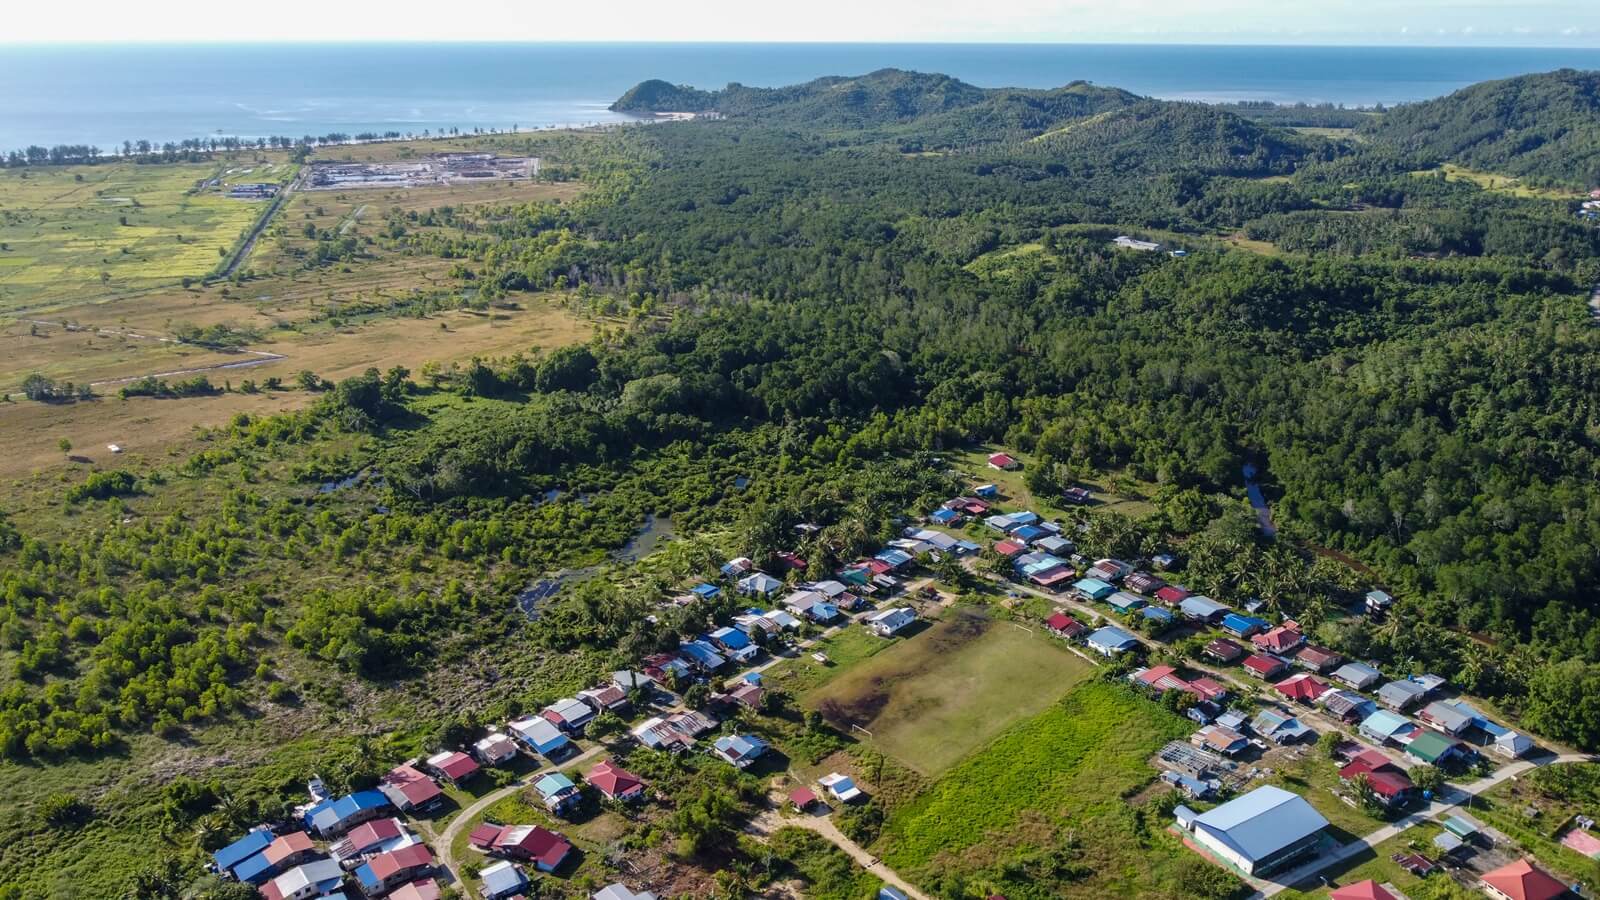 Living only 500 metres from the sand mining site (top left), some villagers in Kampung Andab Bangau are worried for their health and safety. (Chen Yih Wen)